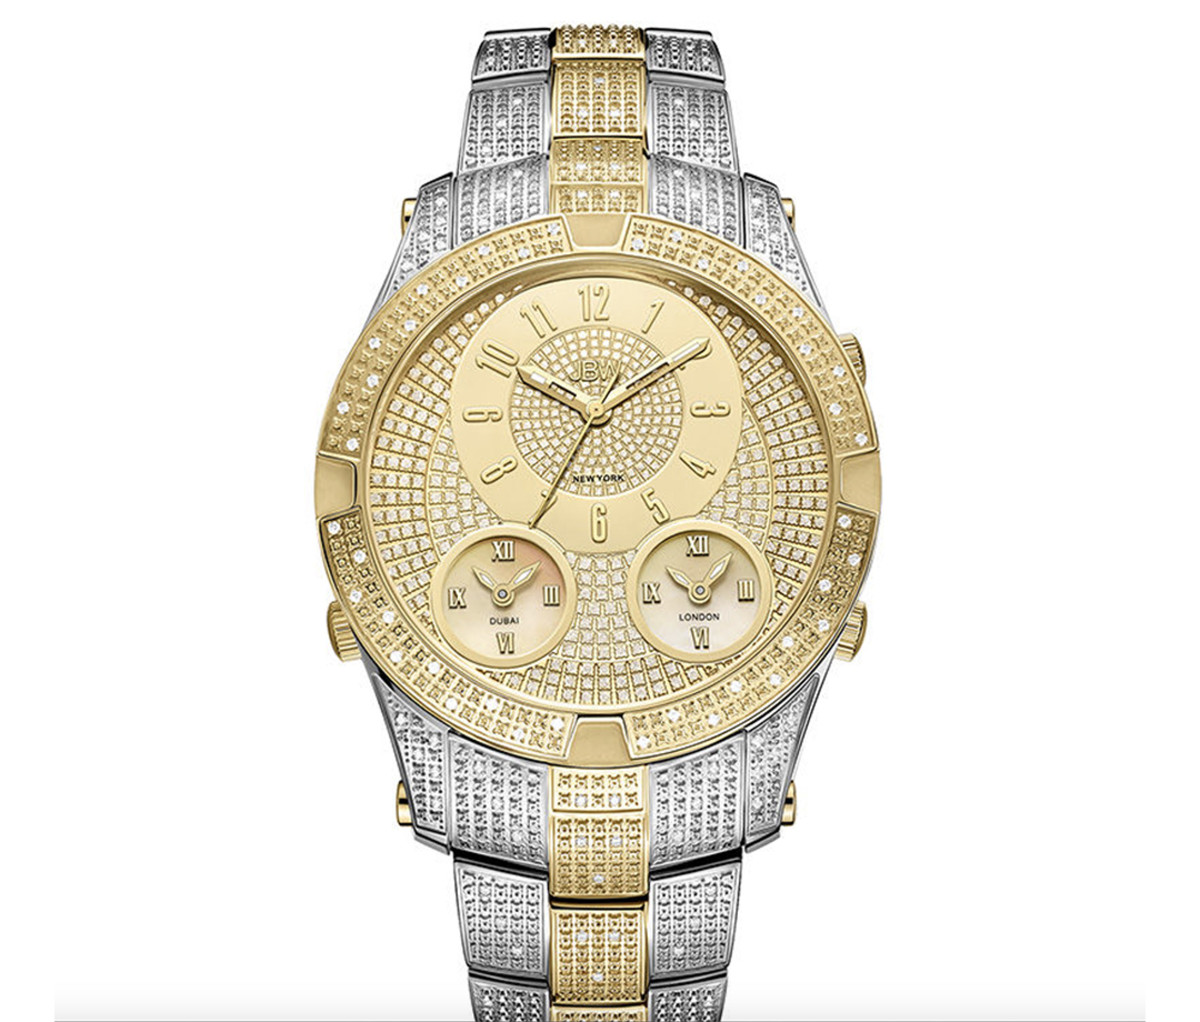 The Best Real Gold Watches for Men in 2022 from $149 to $32K - Men's ...